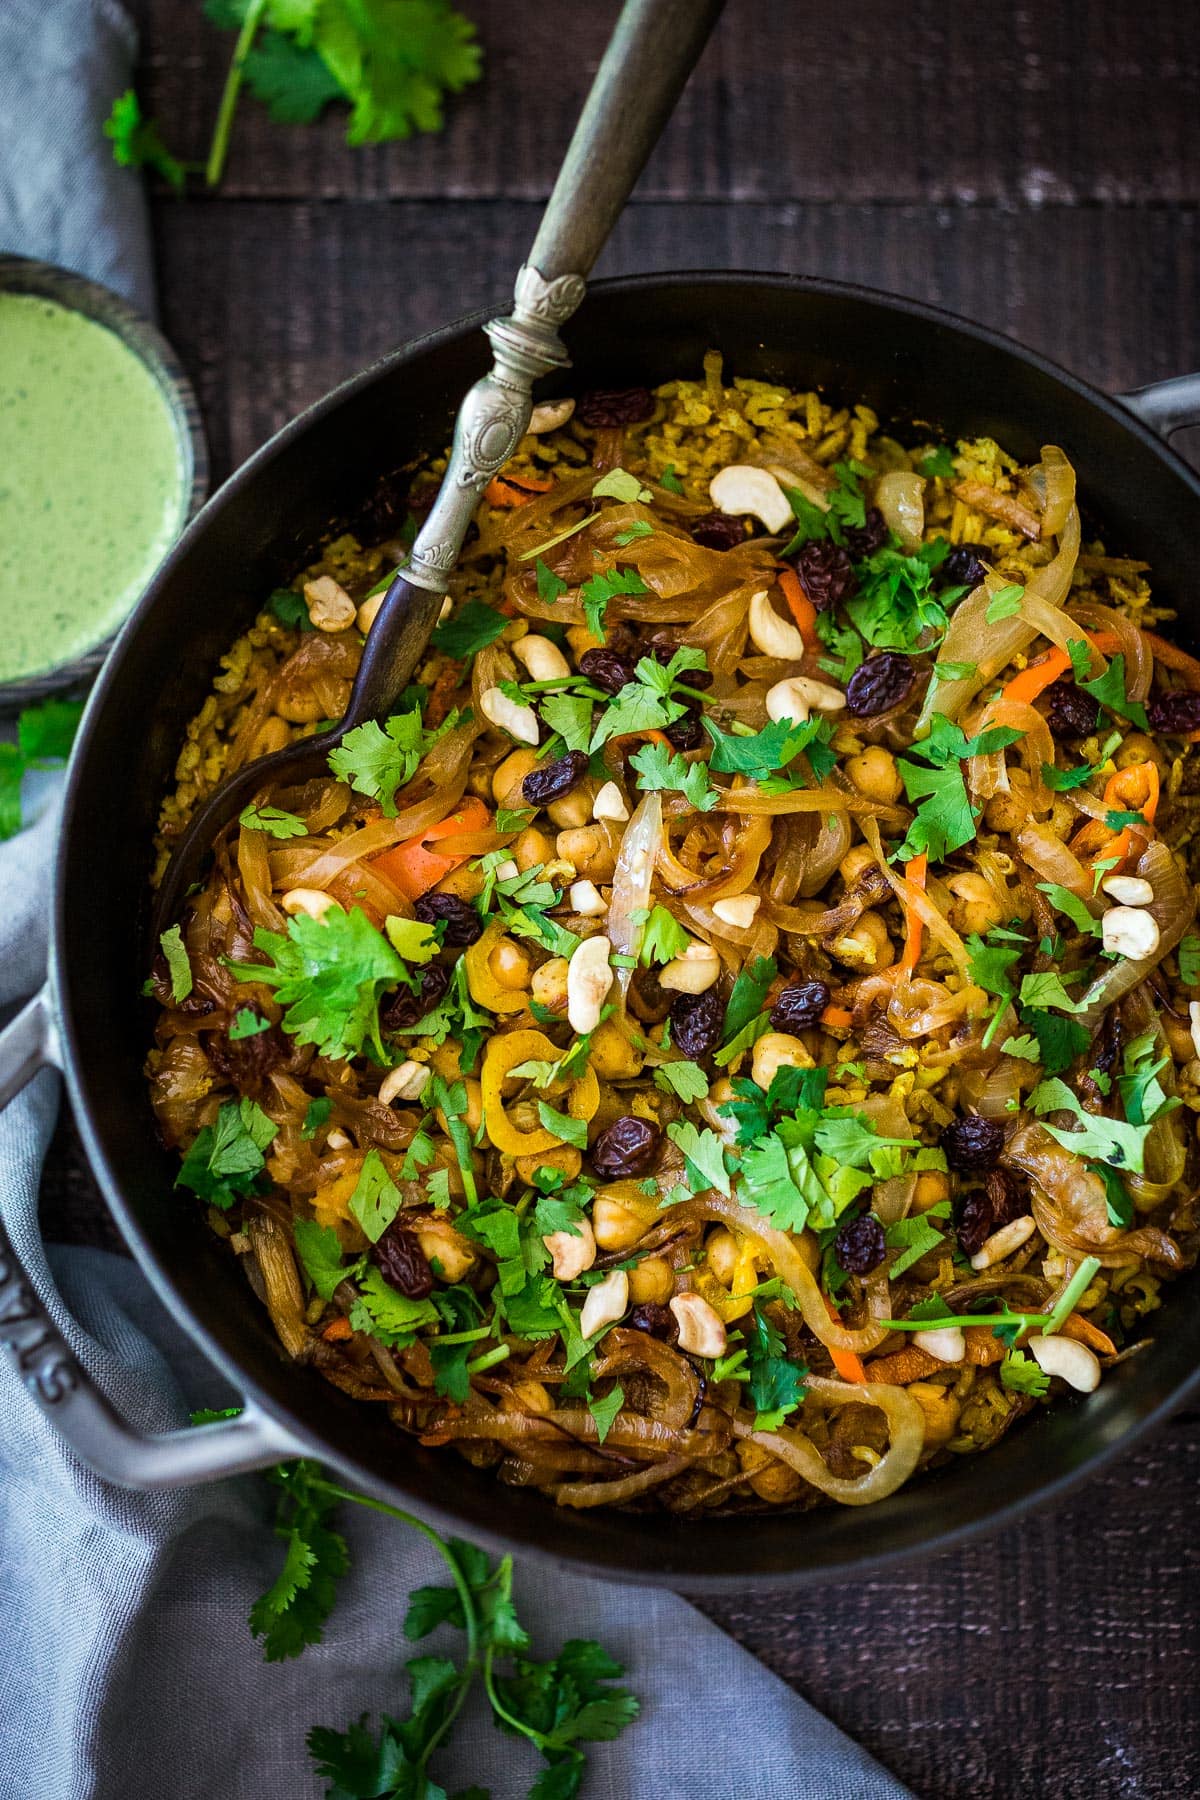 Delicious Vegetable Biryani! A fragrant Indian rice dish infused with Indian spices, healthy veggies and chickpeas.  Vegan adaptable and gluten-free. A quick and easy weeknight meal.